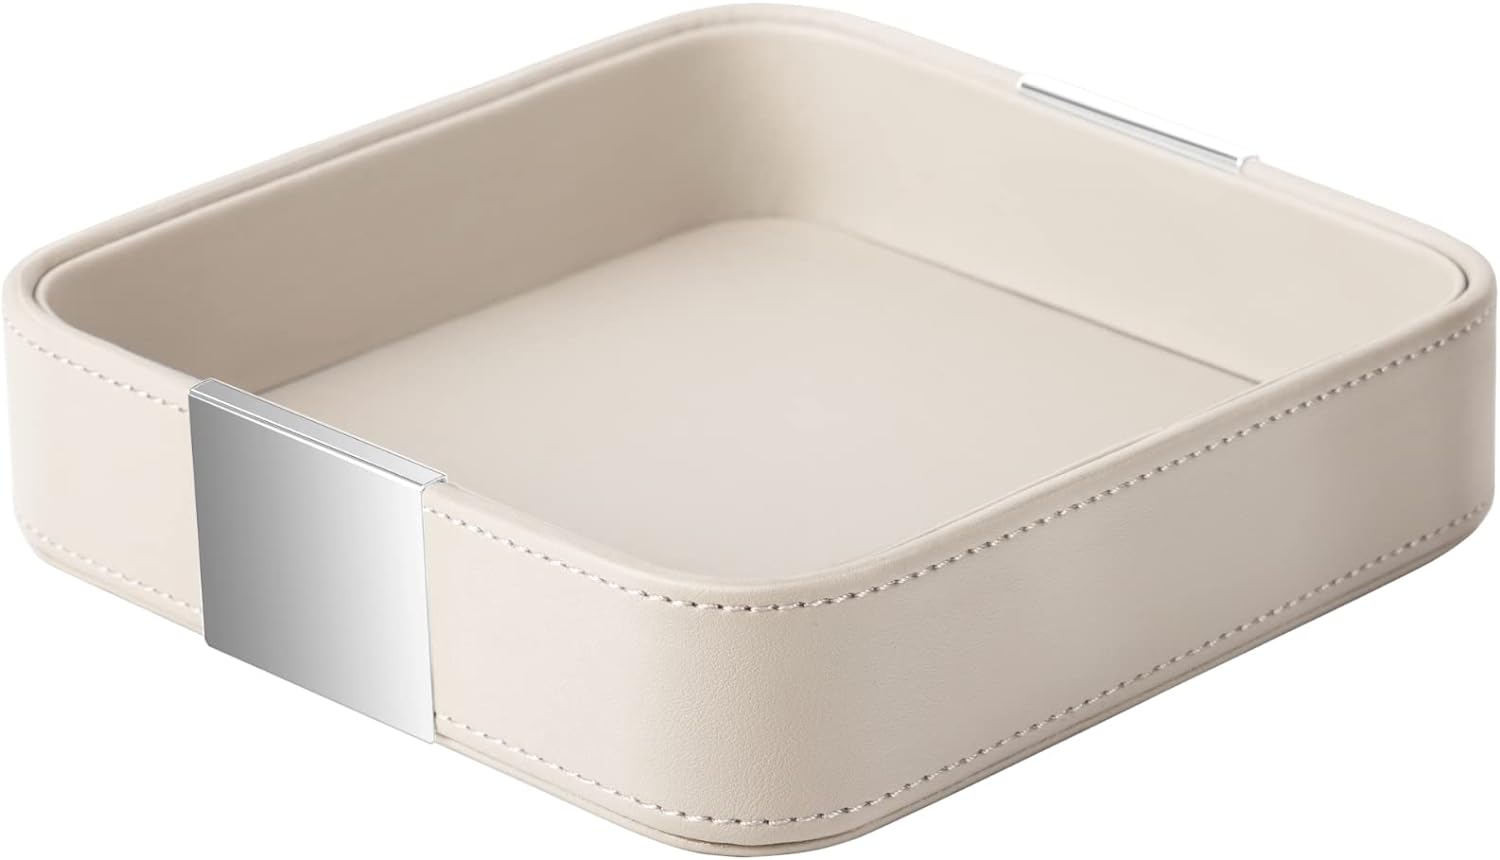 Luxury Leather Desktop Storage, Small Catchall Organizer, Decorative Tray for Entryway Table to Hold Jewelry,Watch,Cosmetics,Keys,Phone,Wallet,Home & Office Accessories (Grey (Silvery Metal))